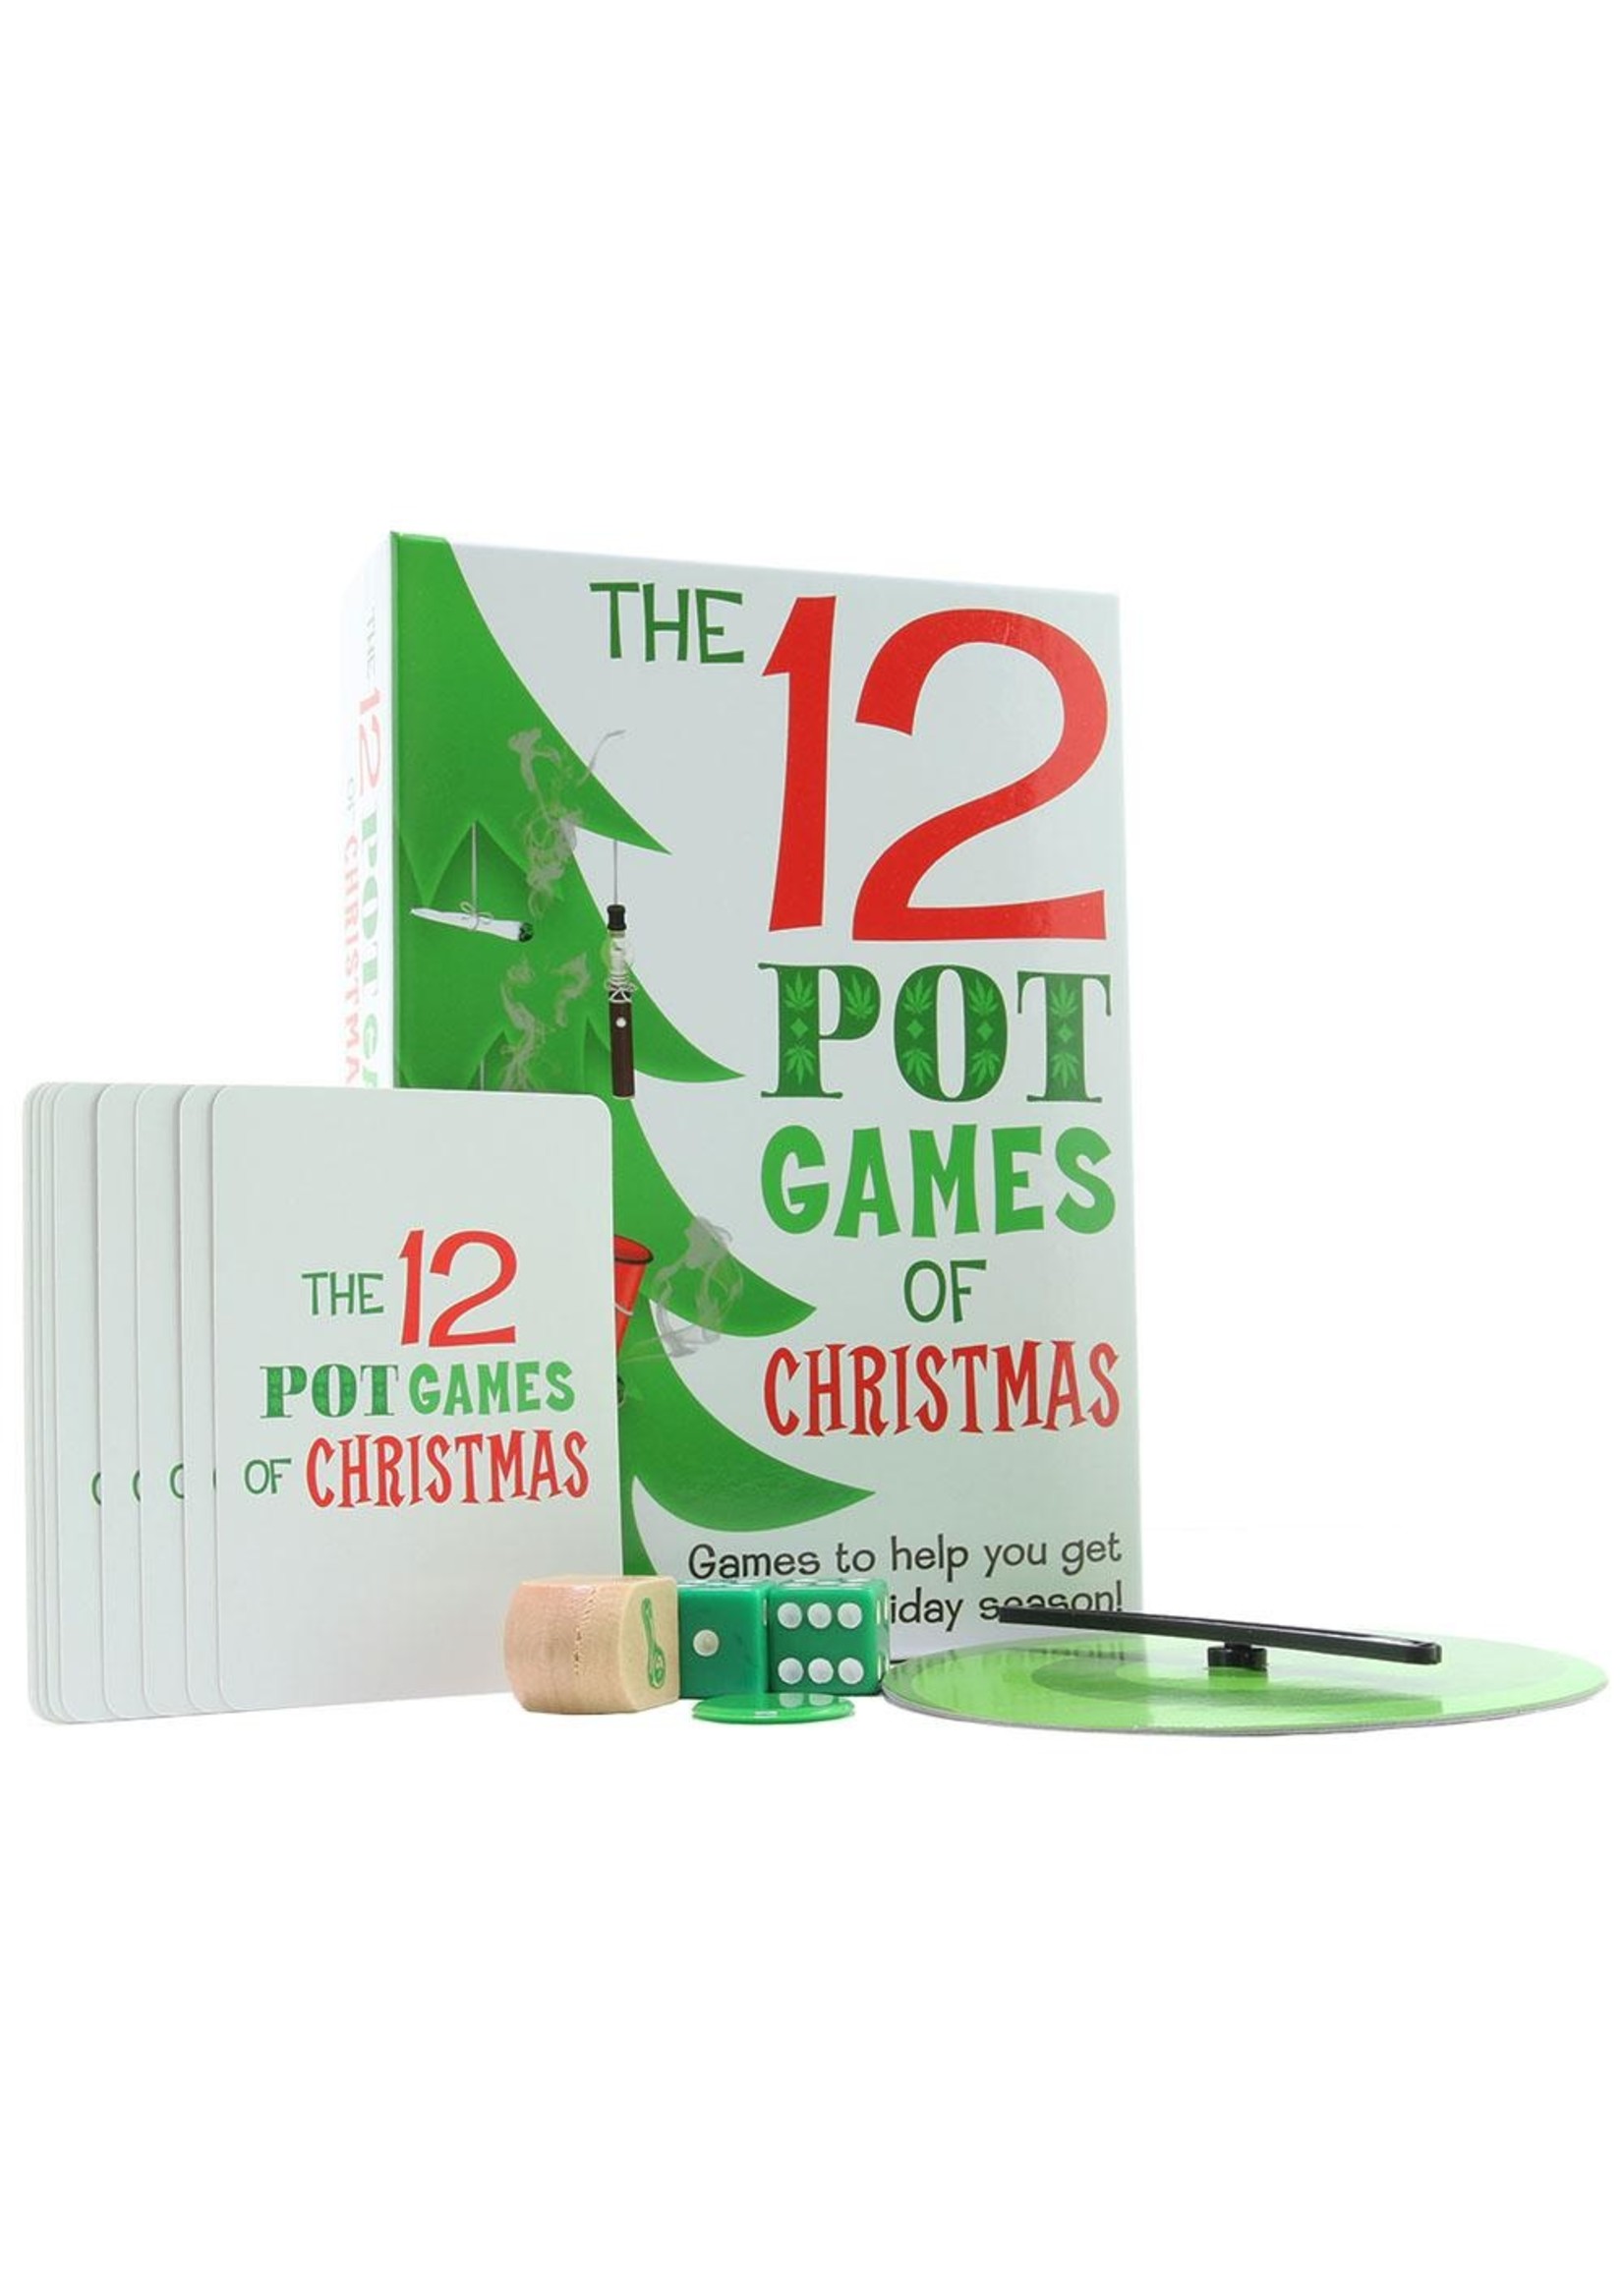 The 12 Pot Games of Christmas